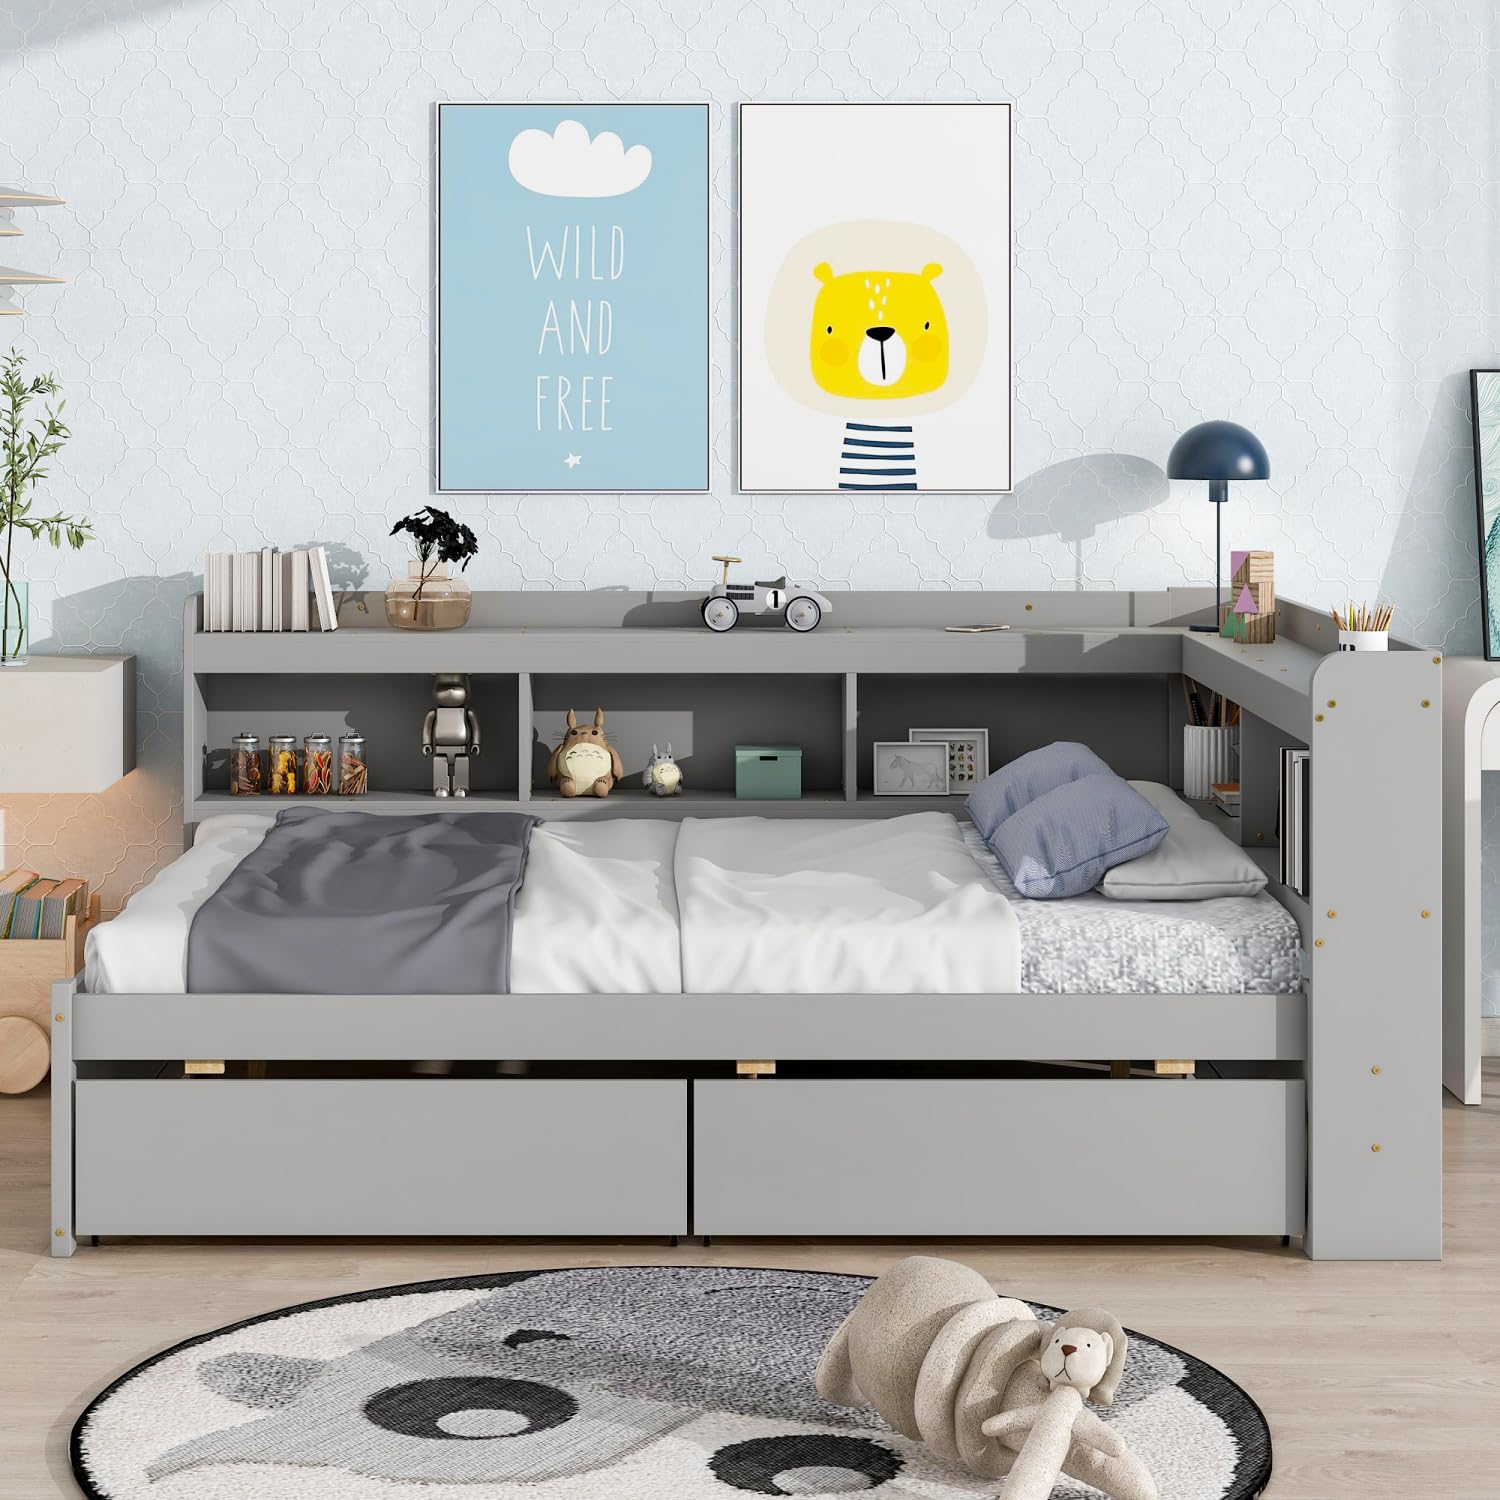 DNChuan Full Size Bed with Storage Drawers and Bookcase Headboard,Pine Wood L-Shaped Bookshelf/Shelves,Gray